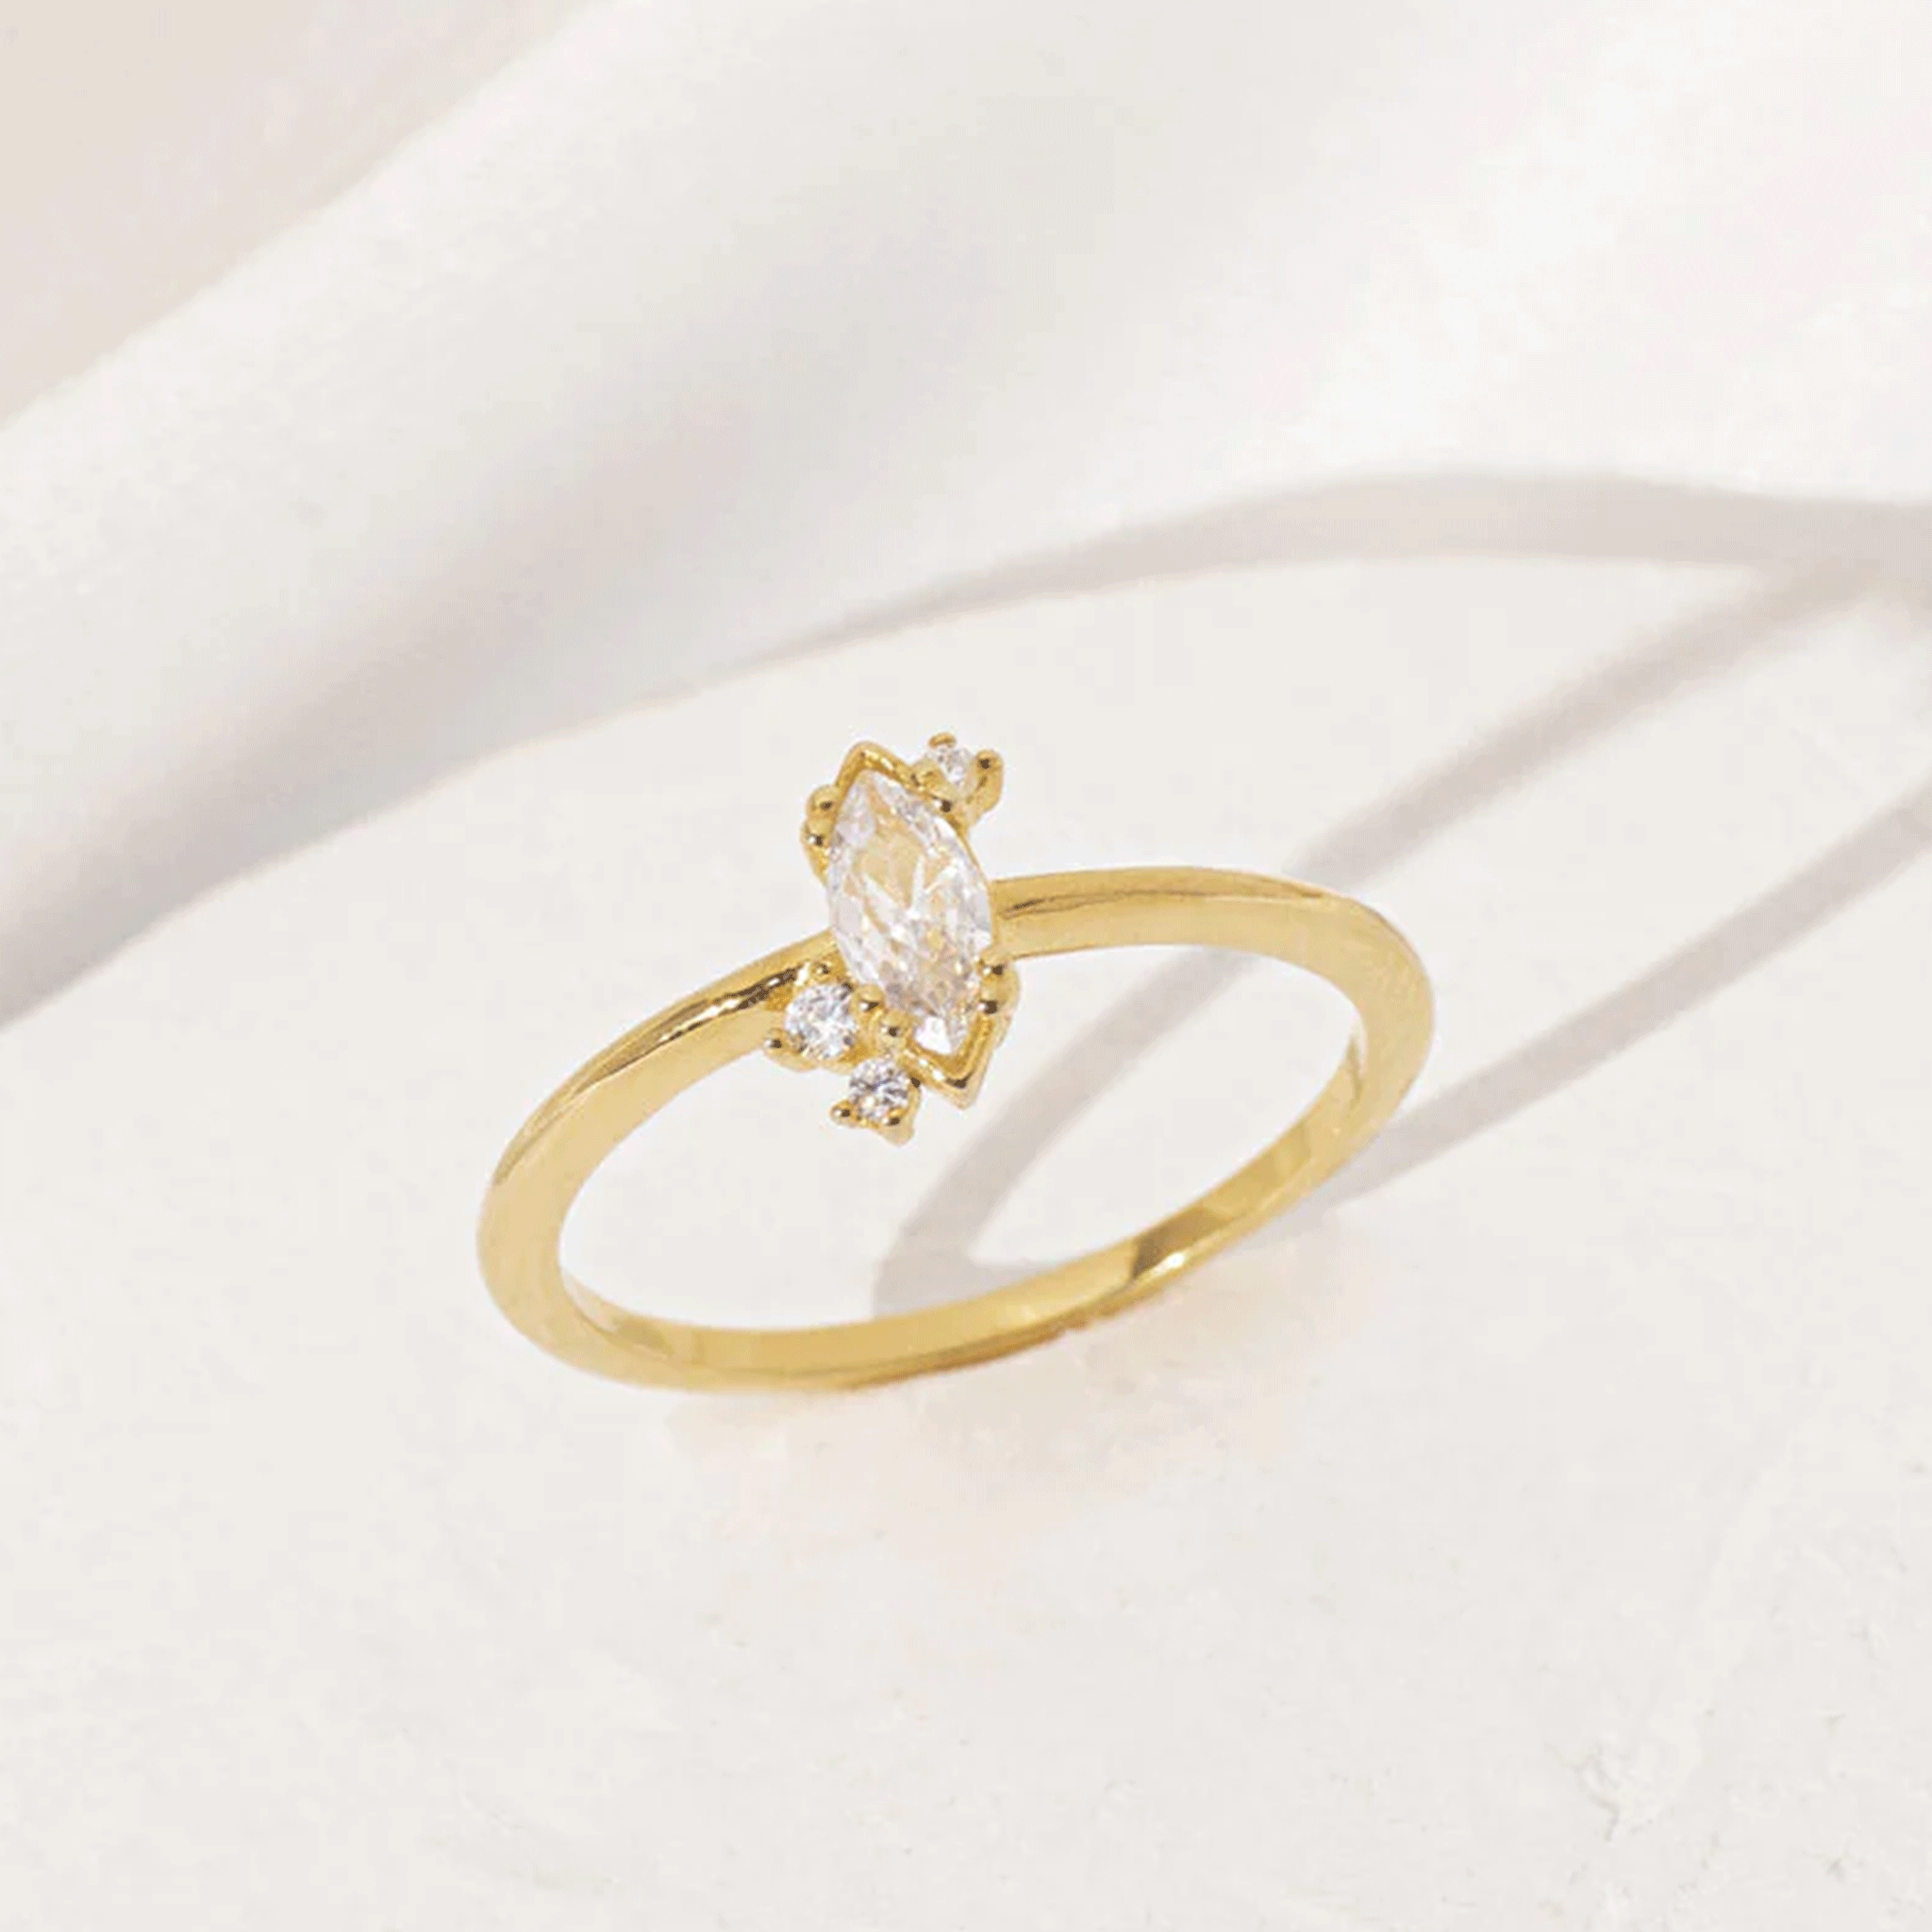 On a white background is a gold ring with a marquise shaped cubic zirconia with three smaller stones, two towards the bottom and on the top. 